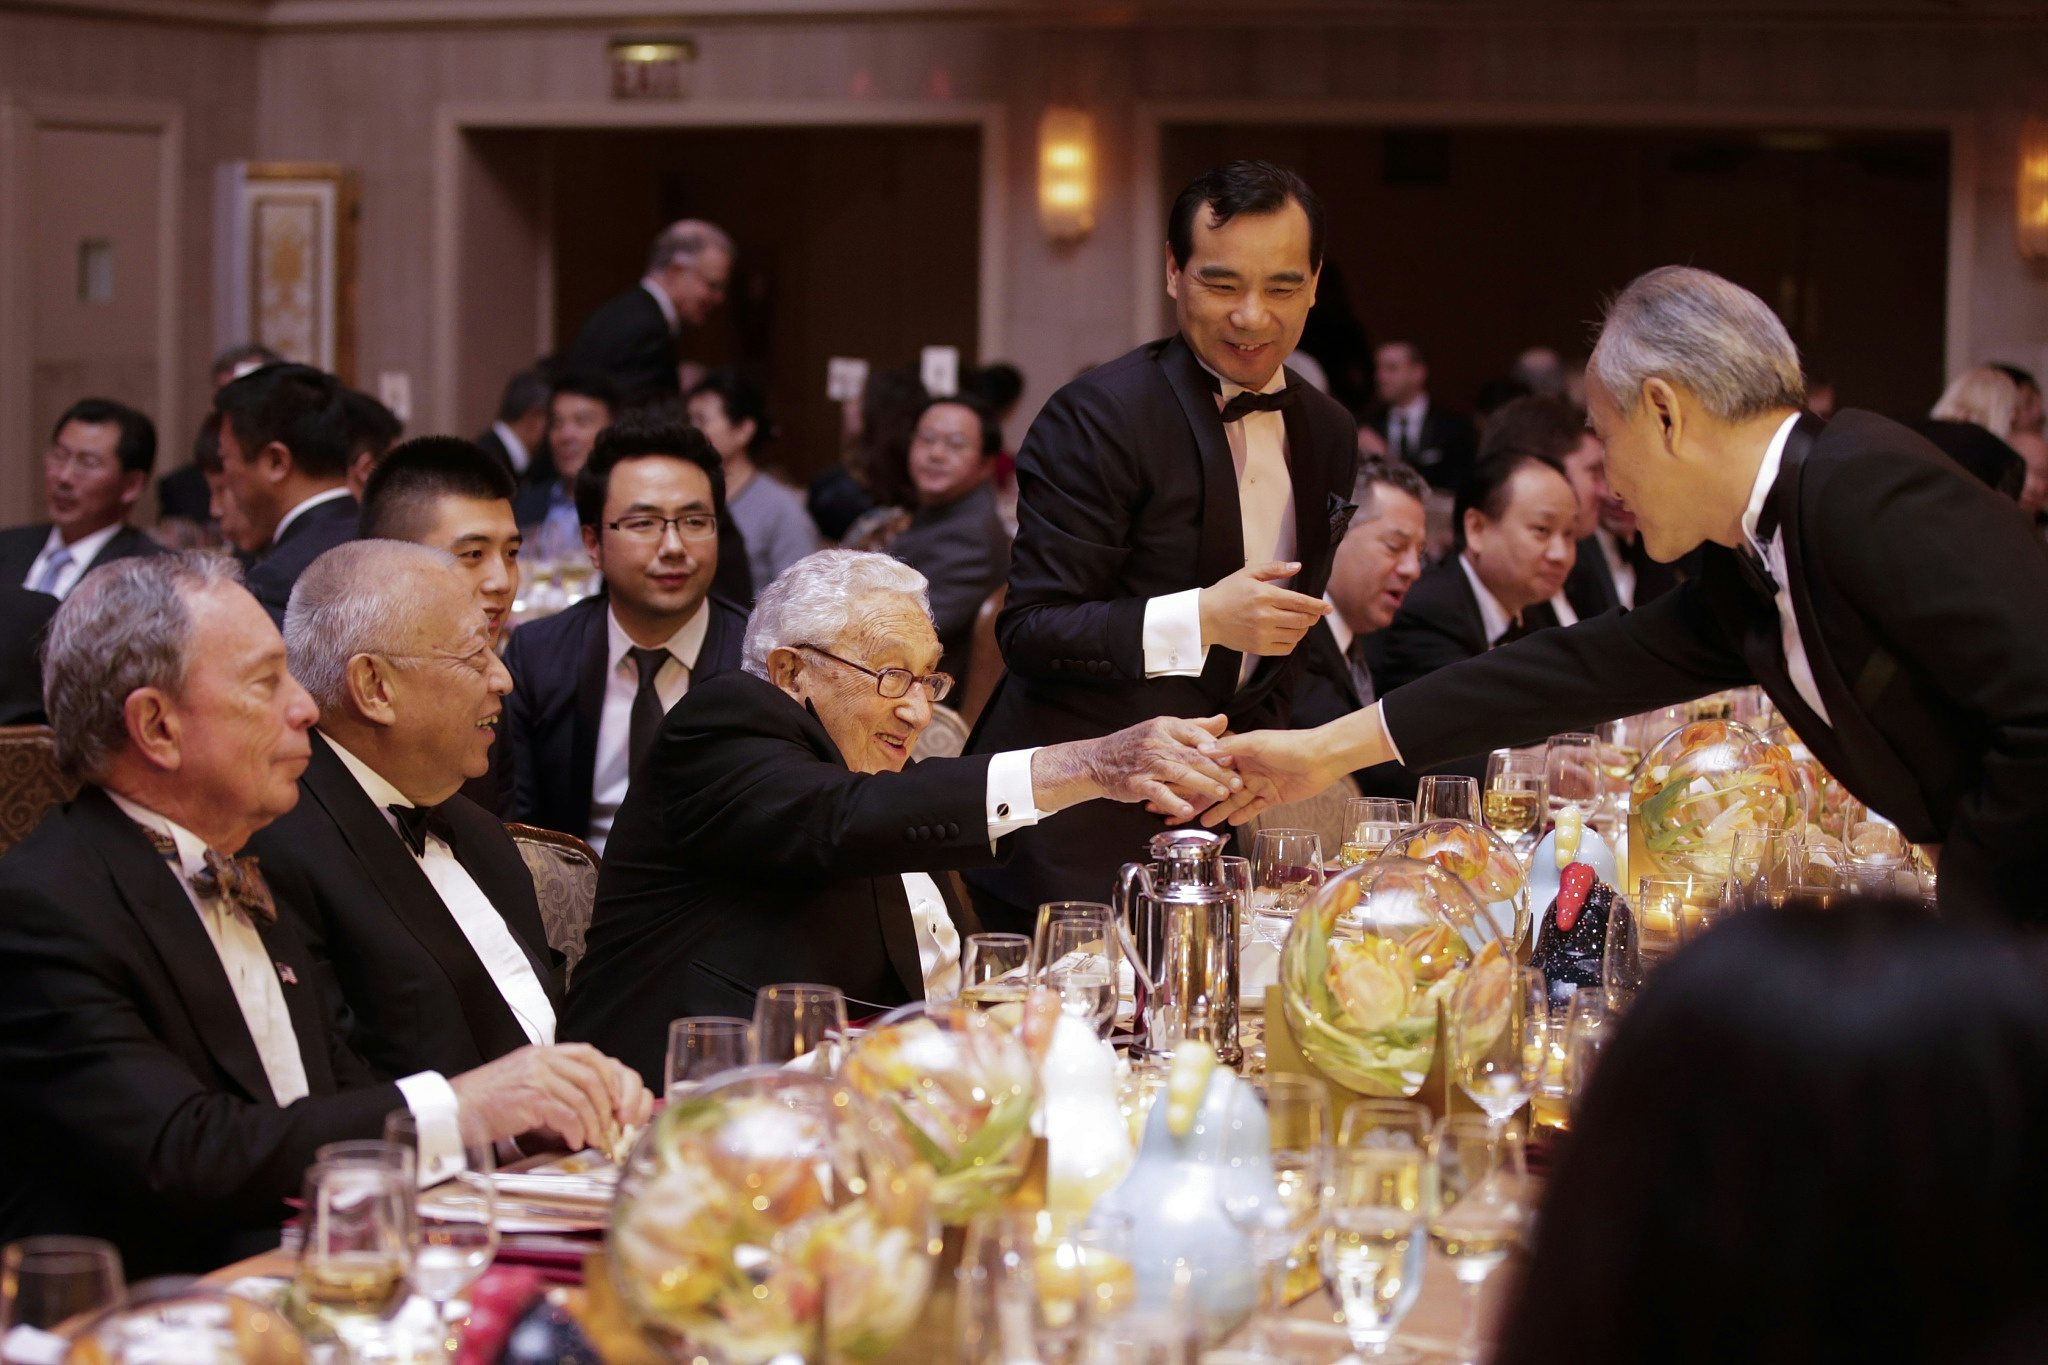 Wu Xiaohui in a dinner meeting with Michael Bloomberg (middle) and Henry Kissinger (right). Photo: VCG